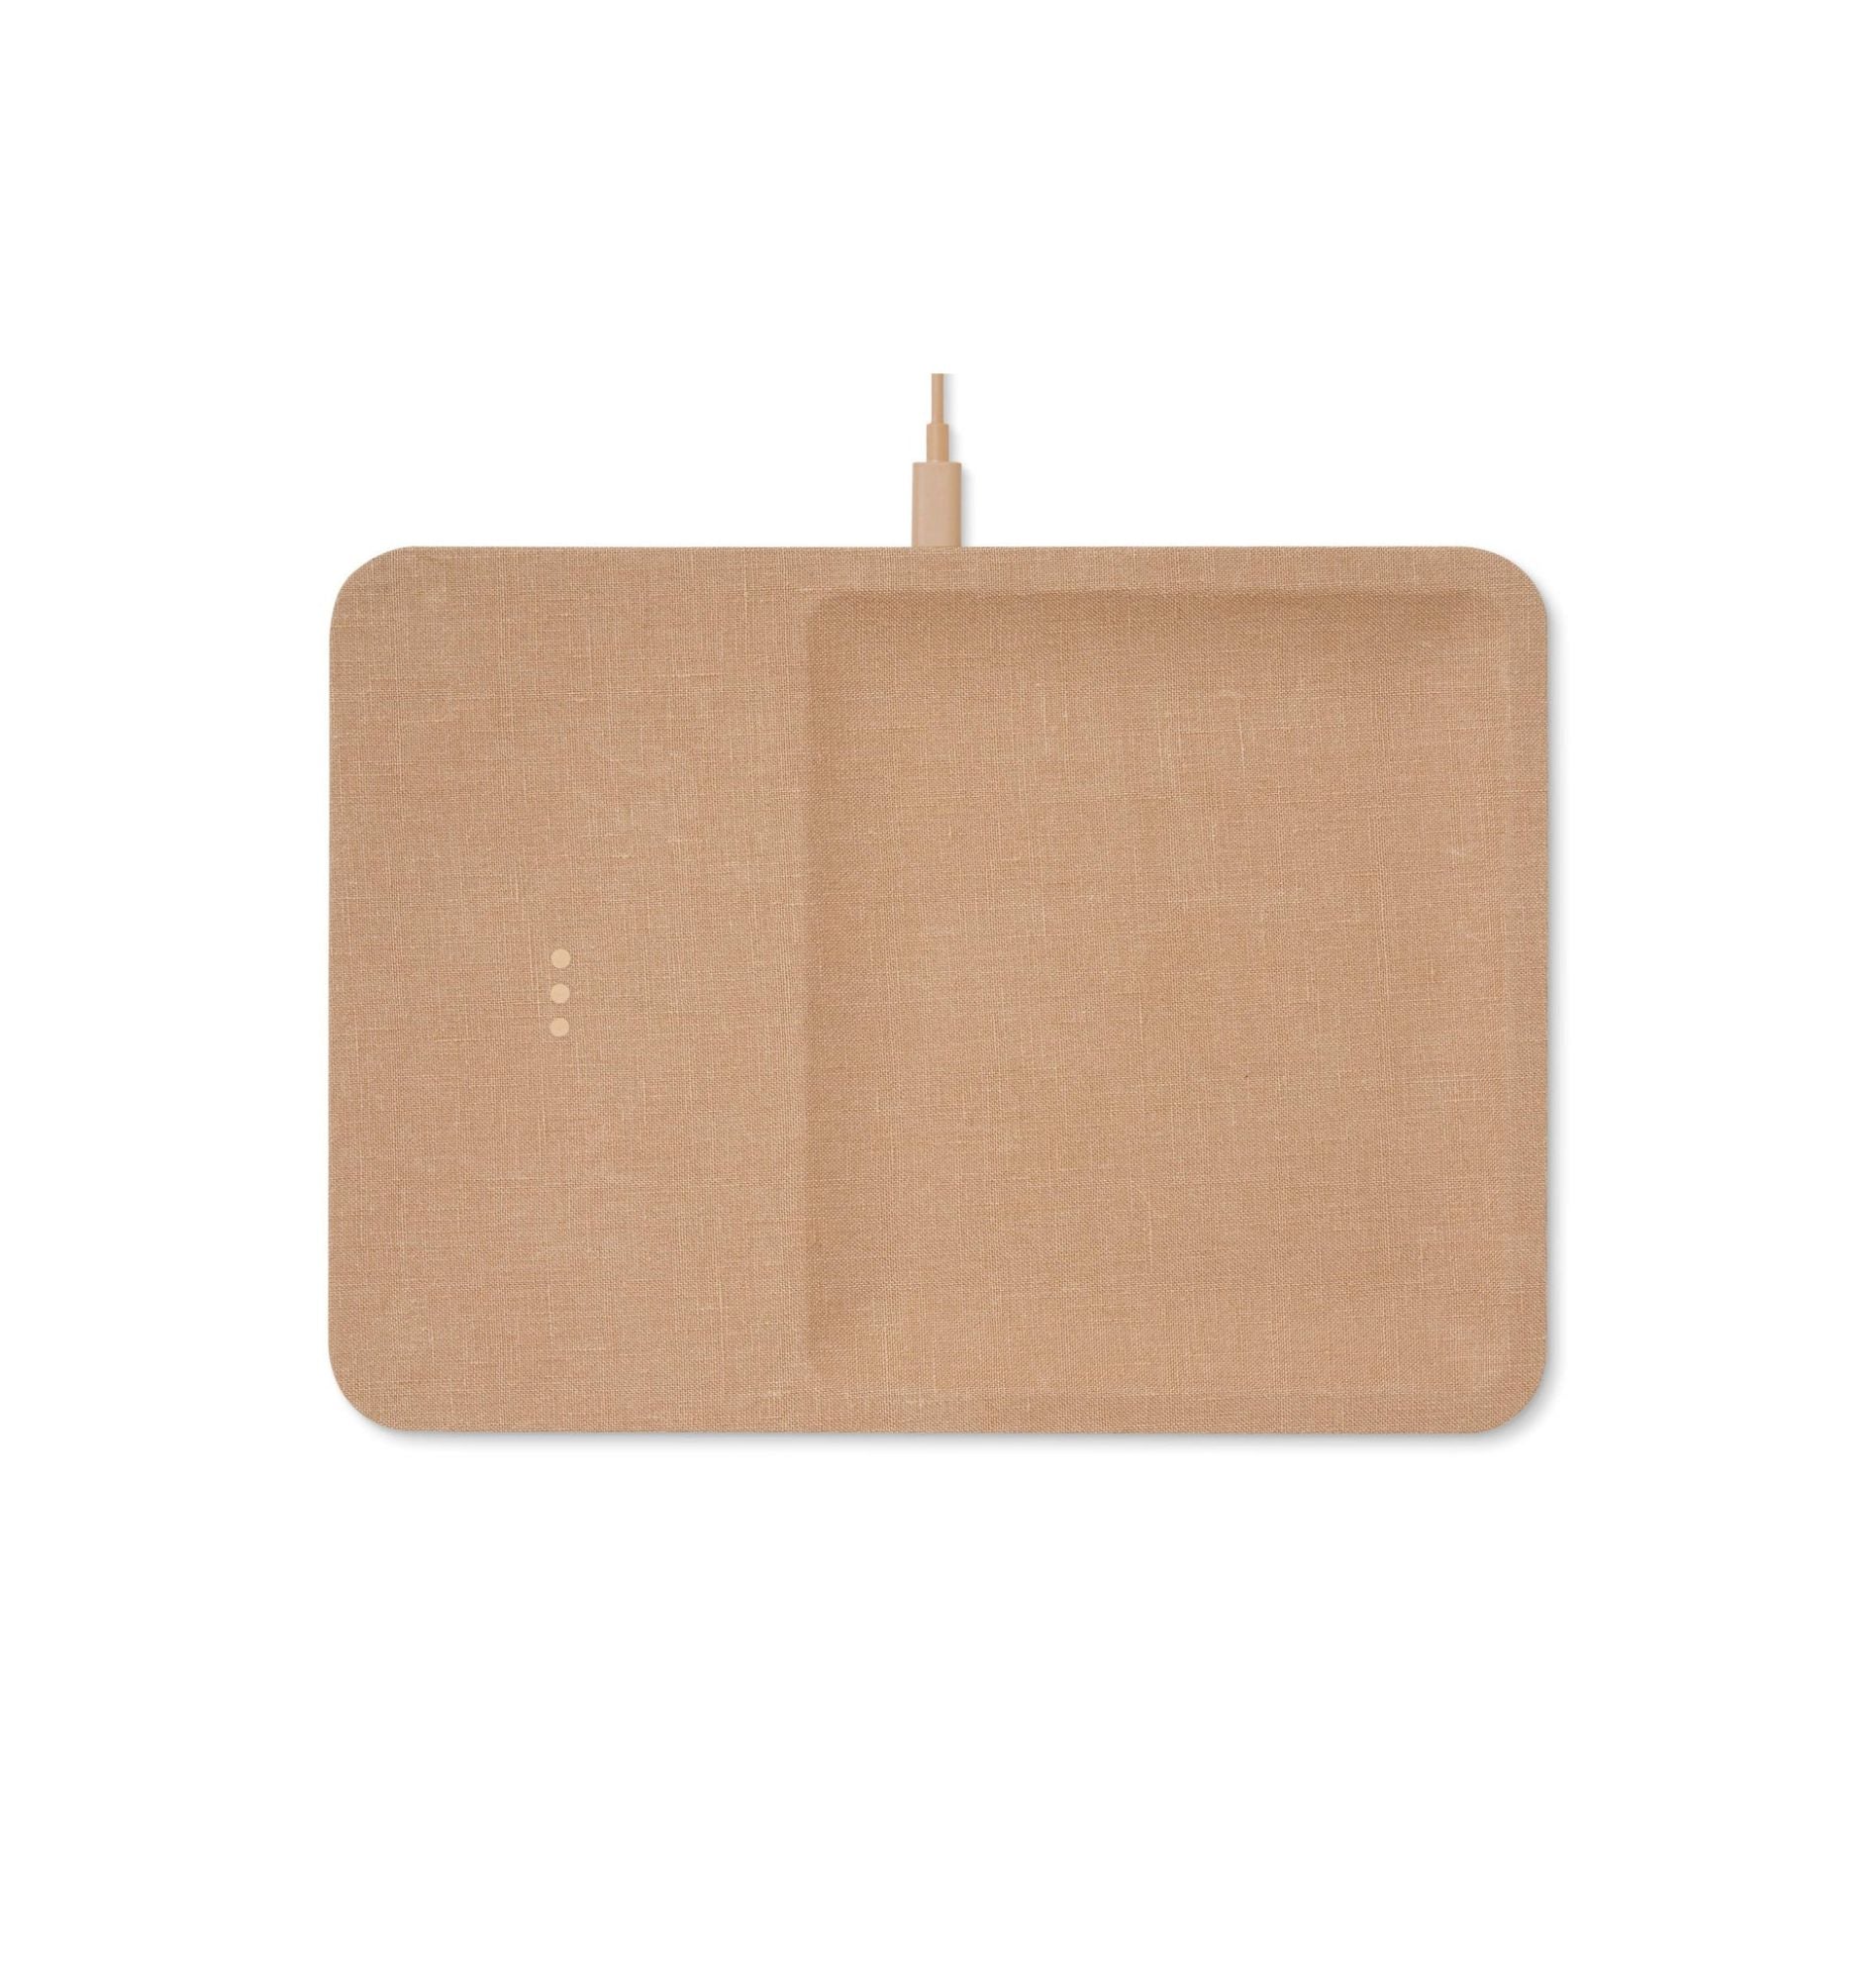 Courant Wireless Charging Catchall, Camel